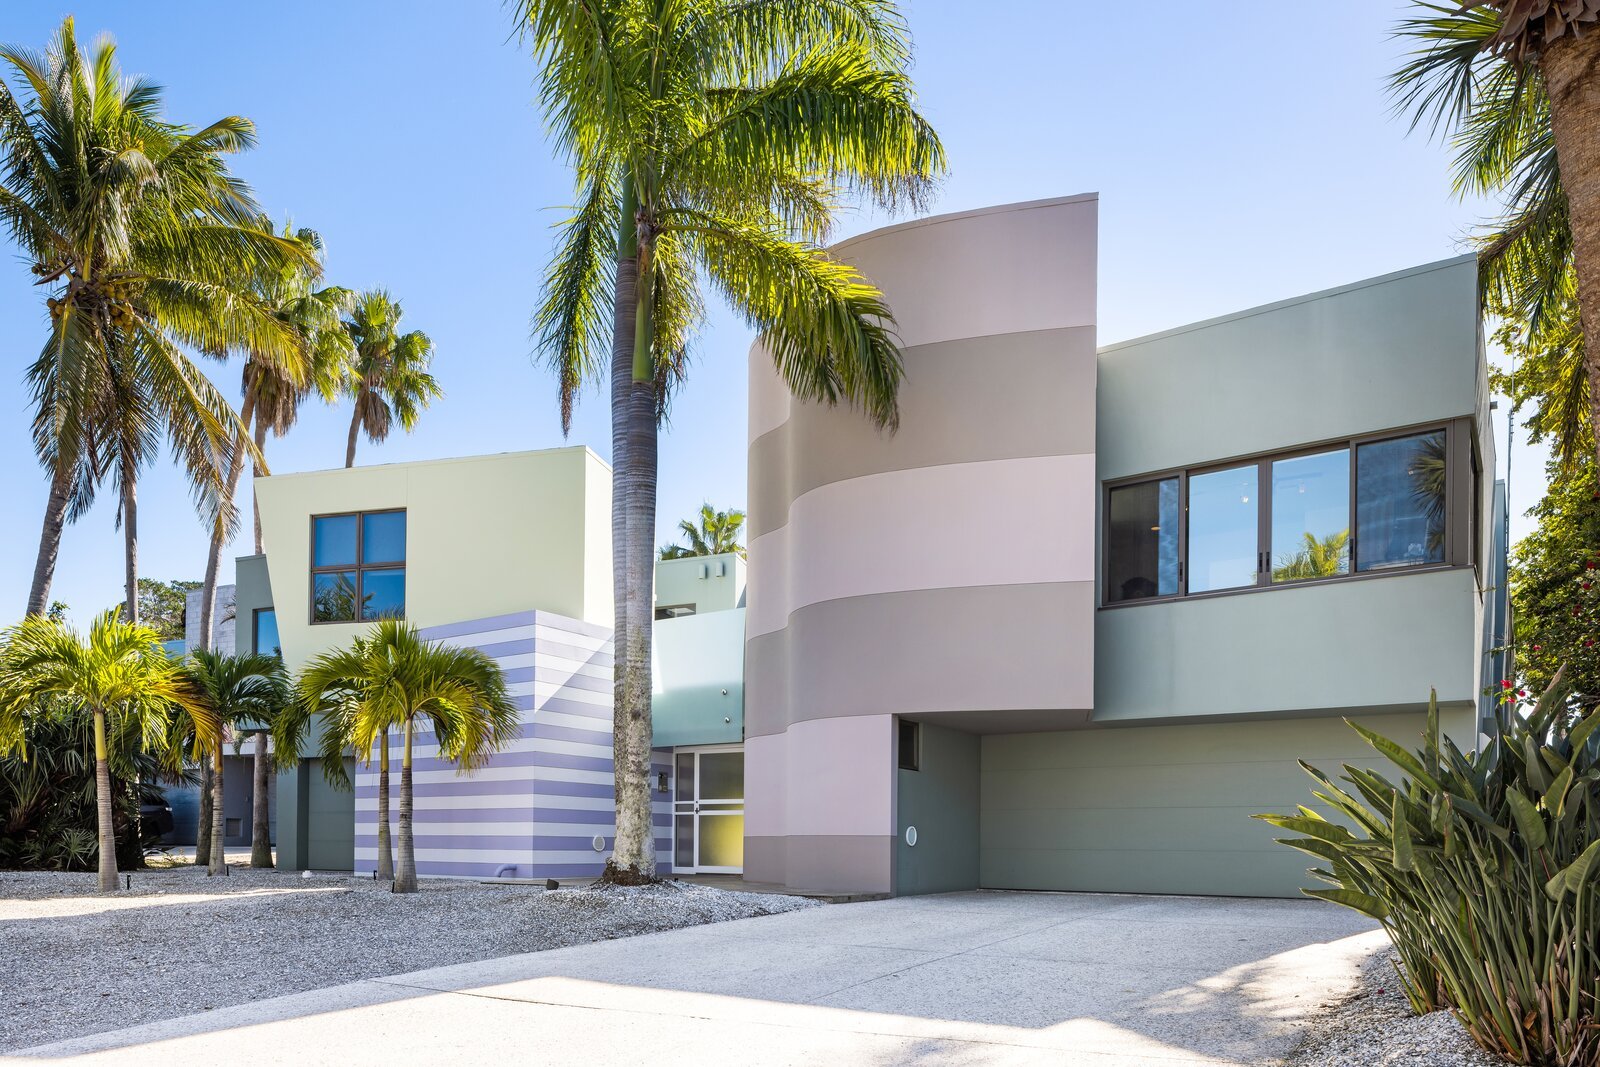 The Curvy, Colorful Home of Architect Don Chapell Hits the Market in Florida